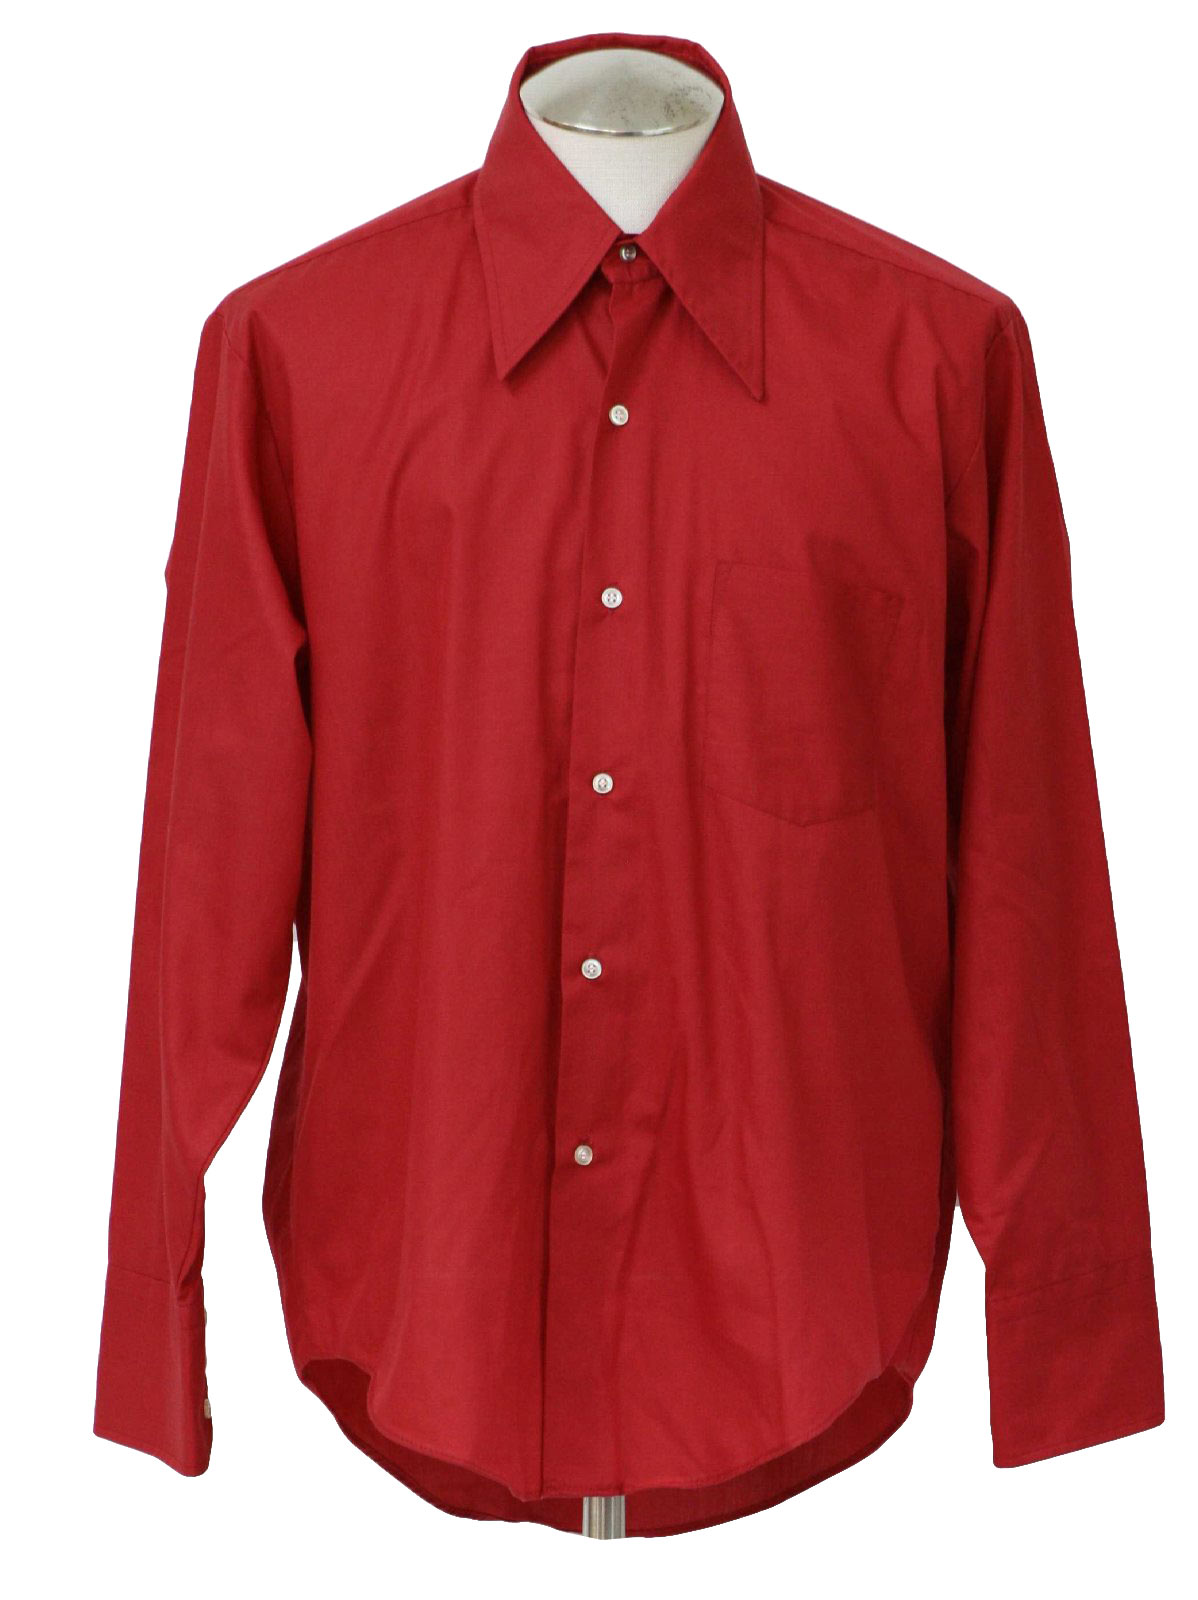 Retro Sixties Shirt: Late 60s or early 70s -Brent- Mens shiny red ...